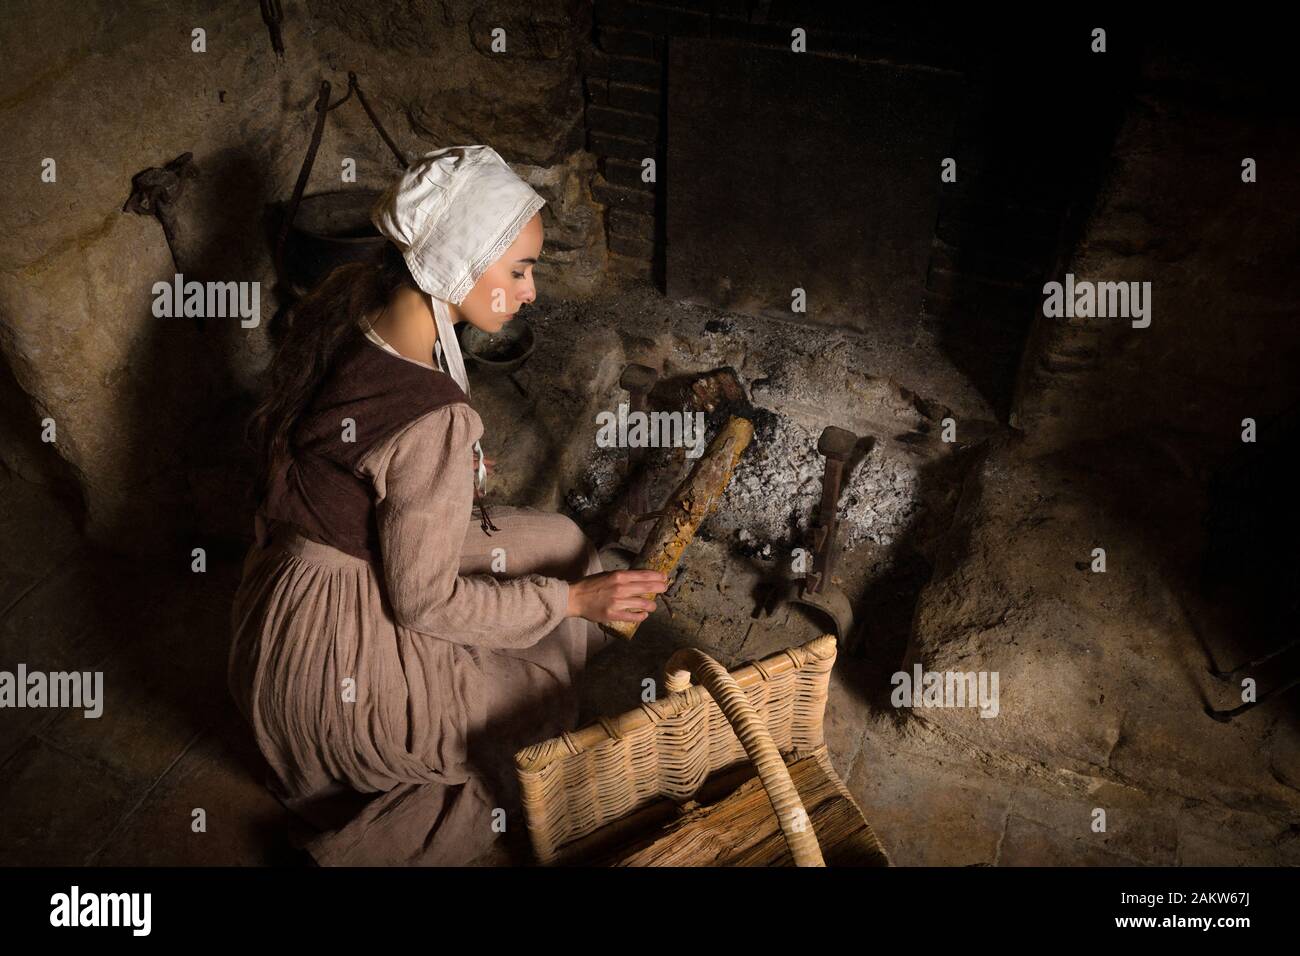 Renaissance portrait in Rembrandt style of a young woman in medieval peasant costume working near the authentic fireplace of a property released Frenc Stock Photo